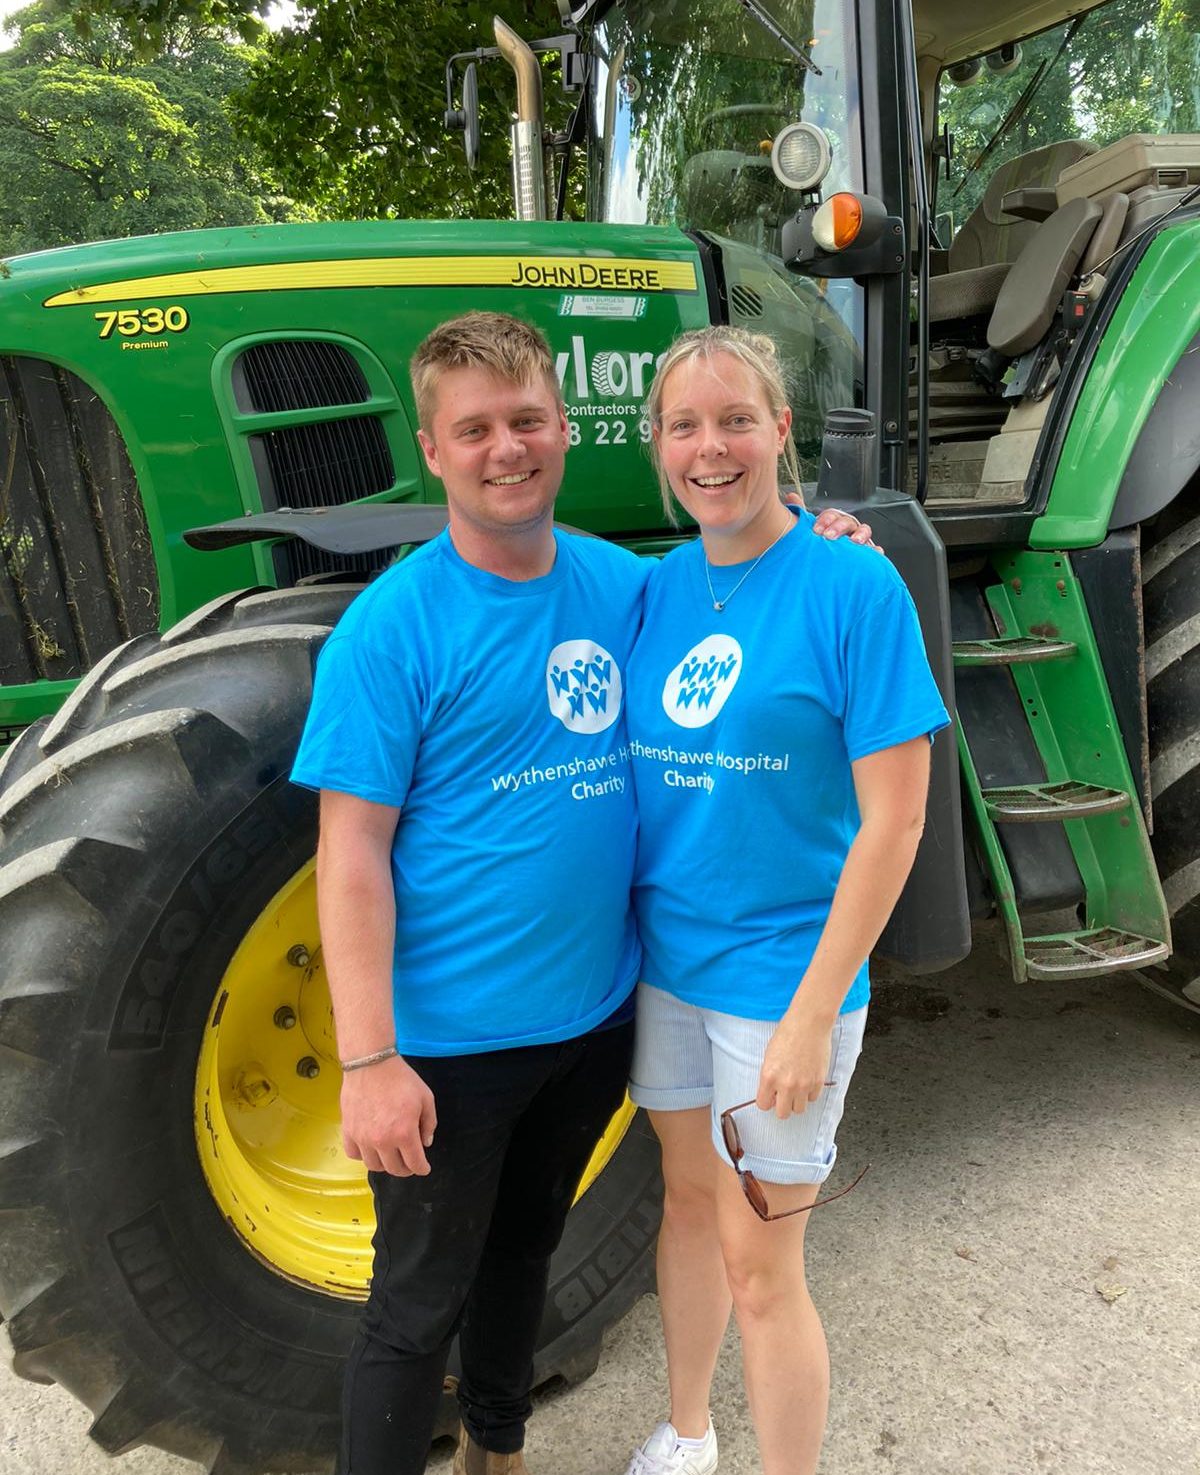 All-ready-to-go-Scott-Goodwin-with-his-cousins-wife-Laura-Mosley-who-is-organising-the-Tractor-Run.-Both-in-Wythenshawe-Hospital-Charity-tshirts